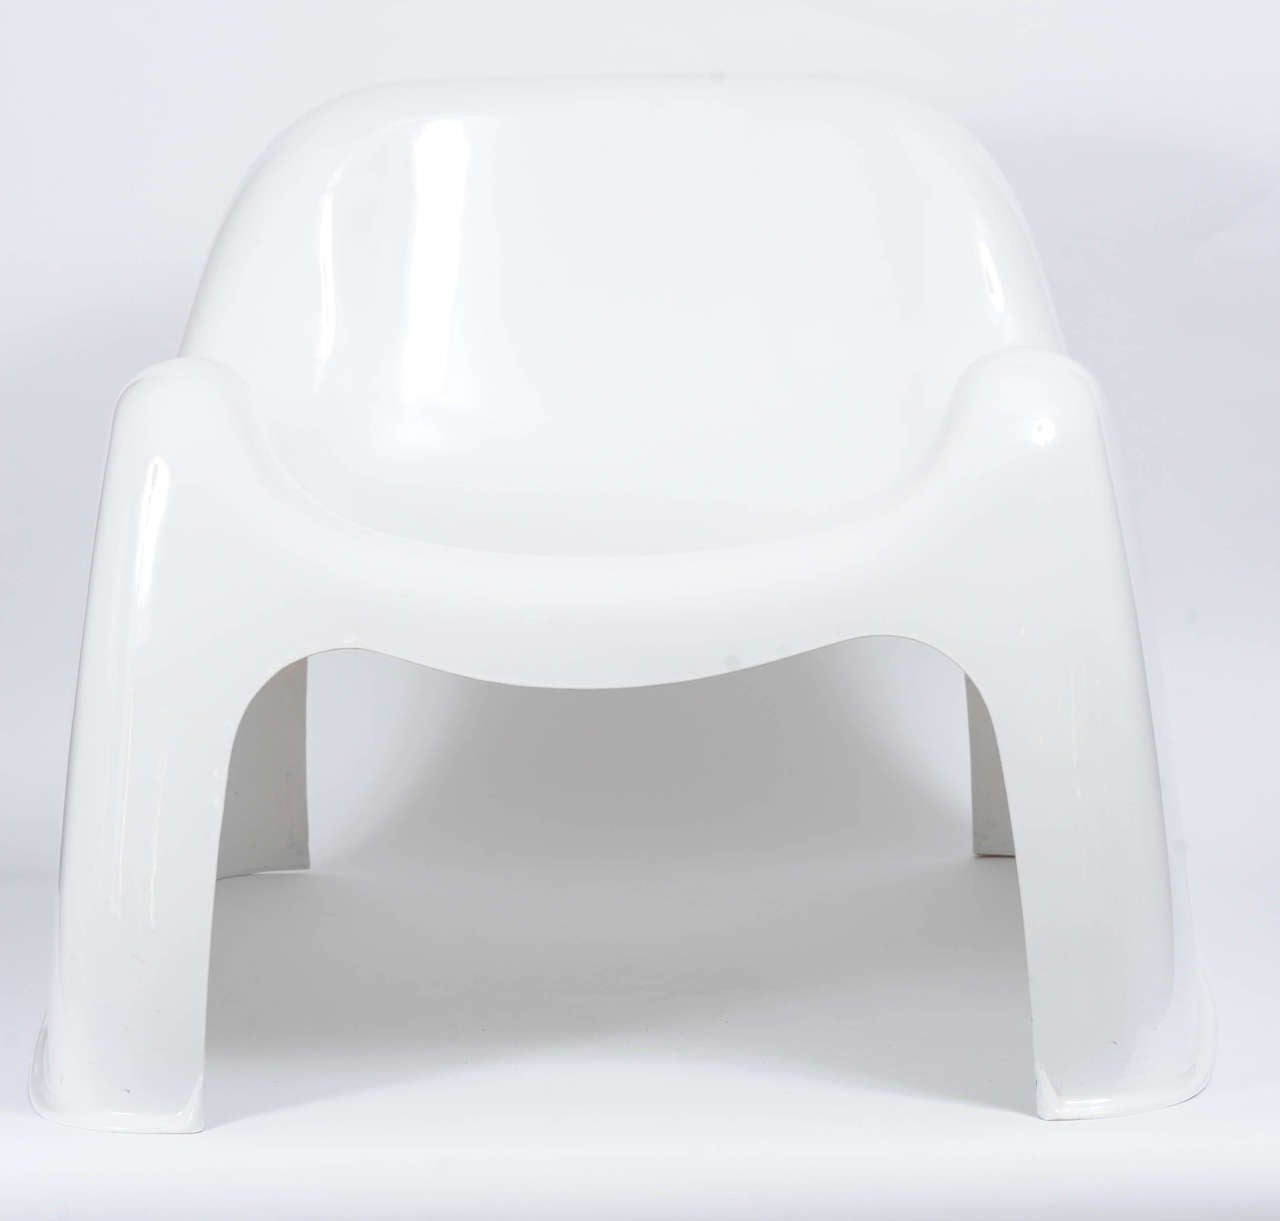 The Toga chair was designed in 1968 by Sergio Mazza voor Artemide.
Fiberglass cast in one piece. Ontwerp uit 1968
Starred on the TV show Space 1999.